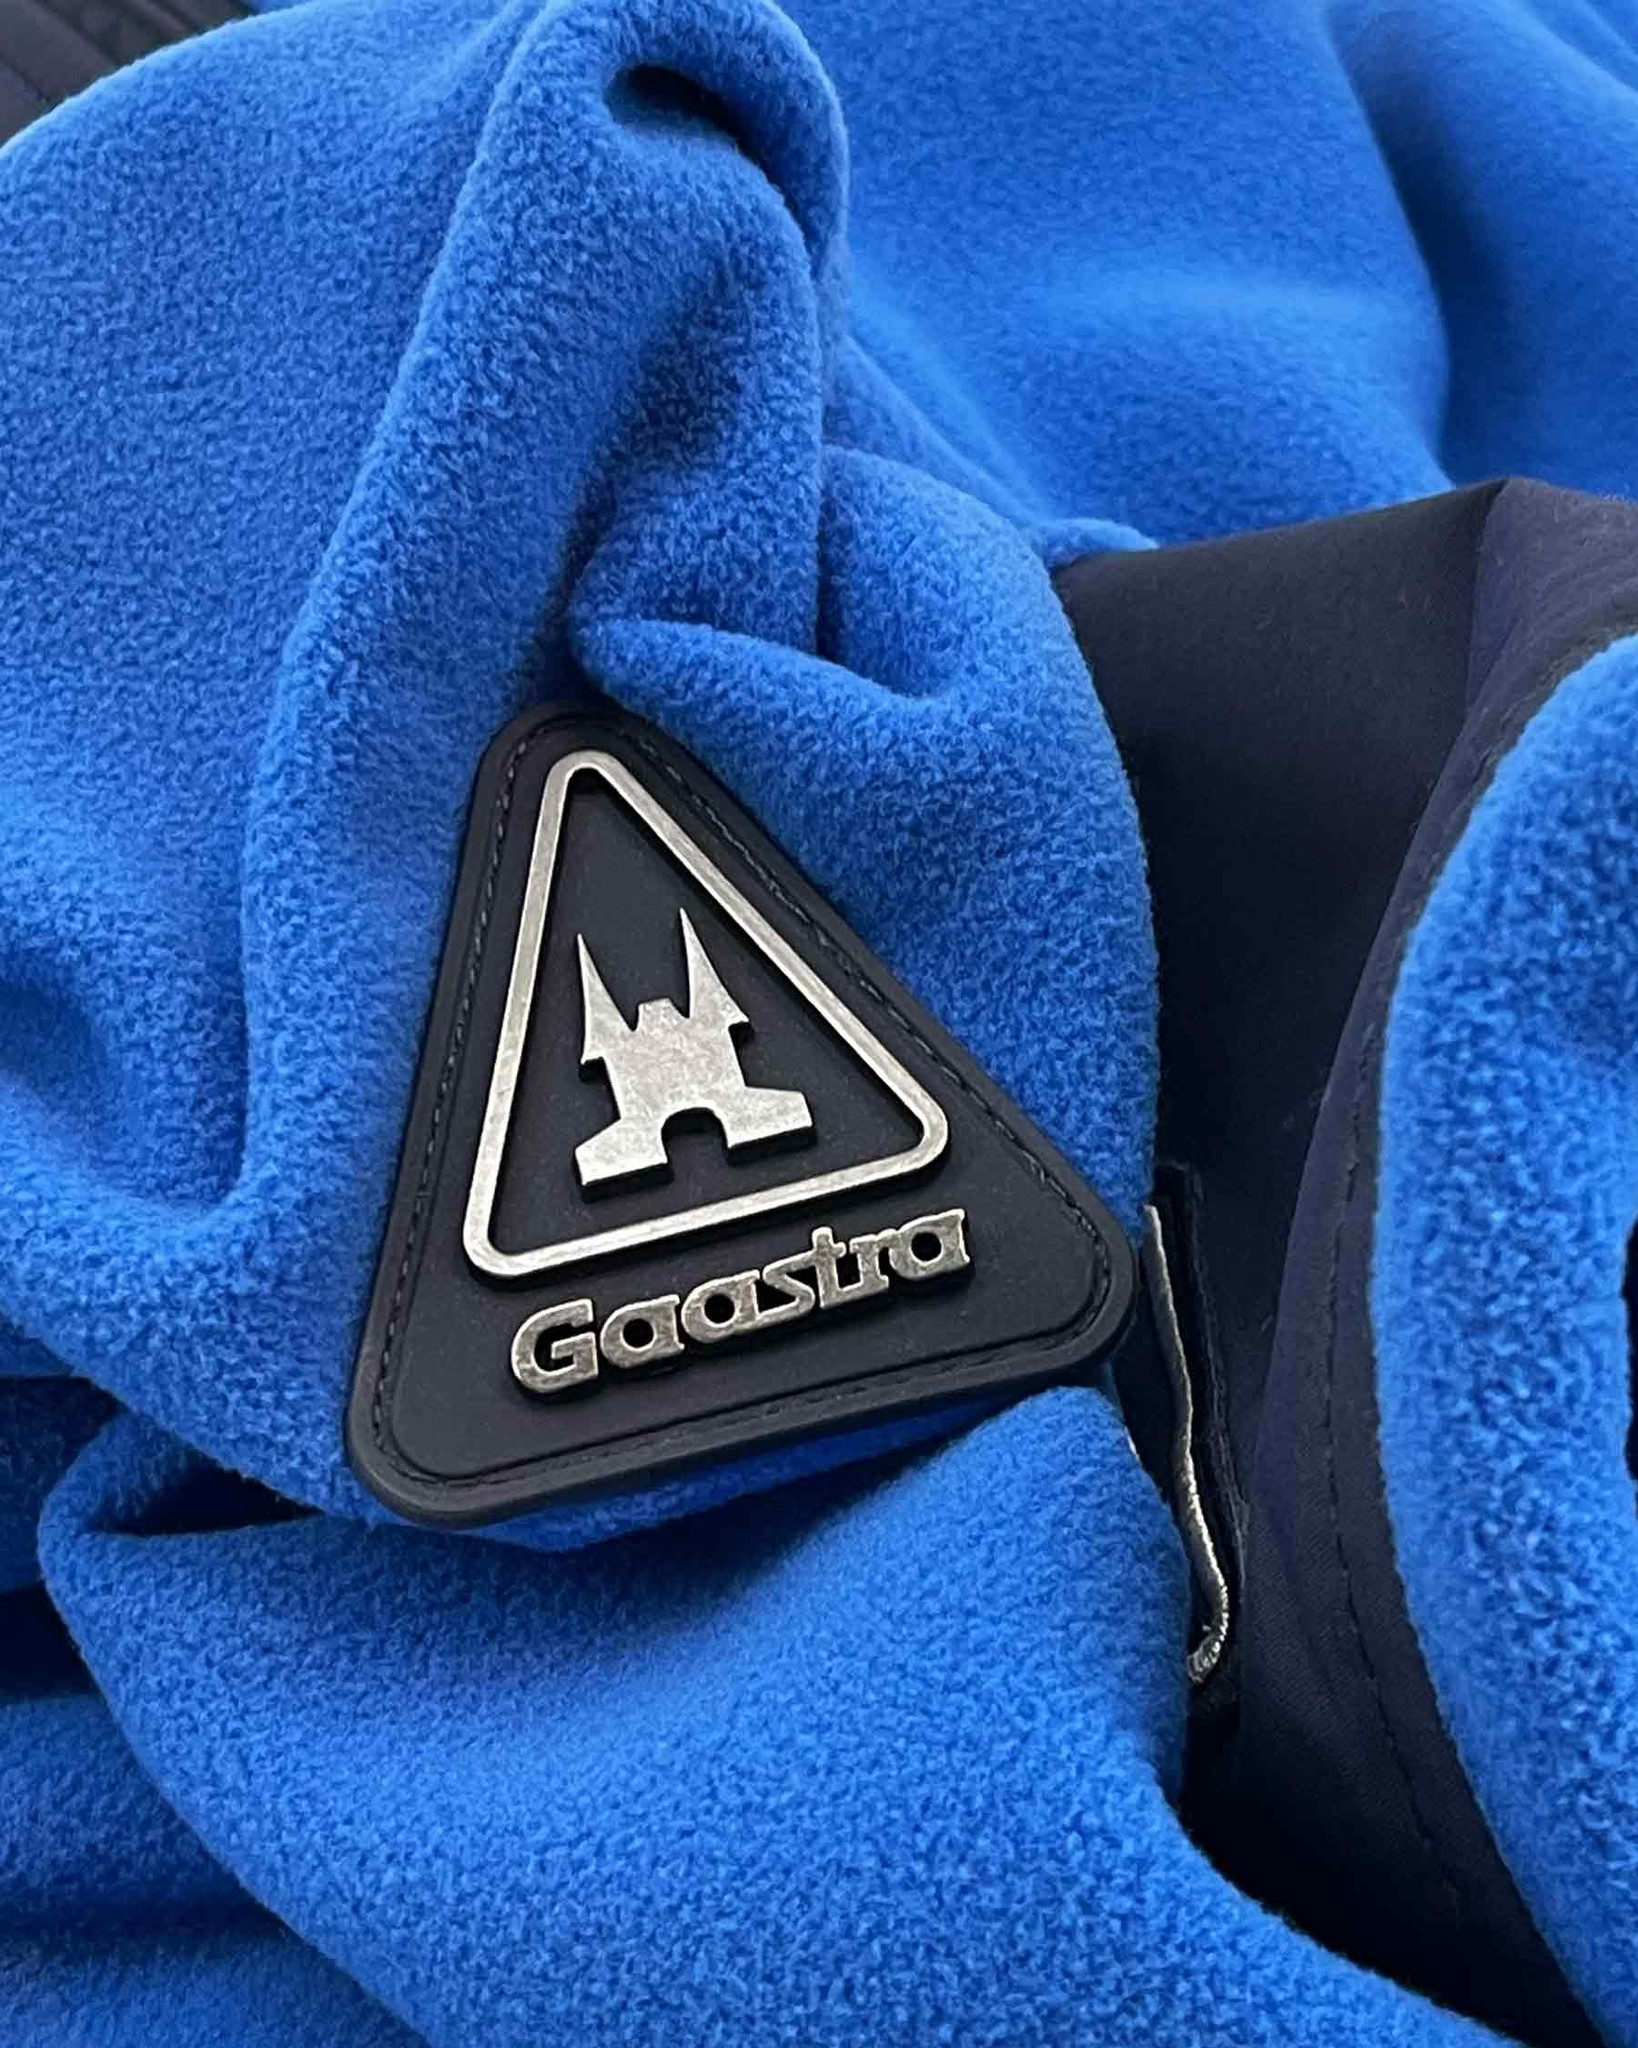 The 100% recycled polyester Viking fleece blue